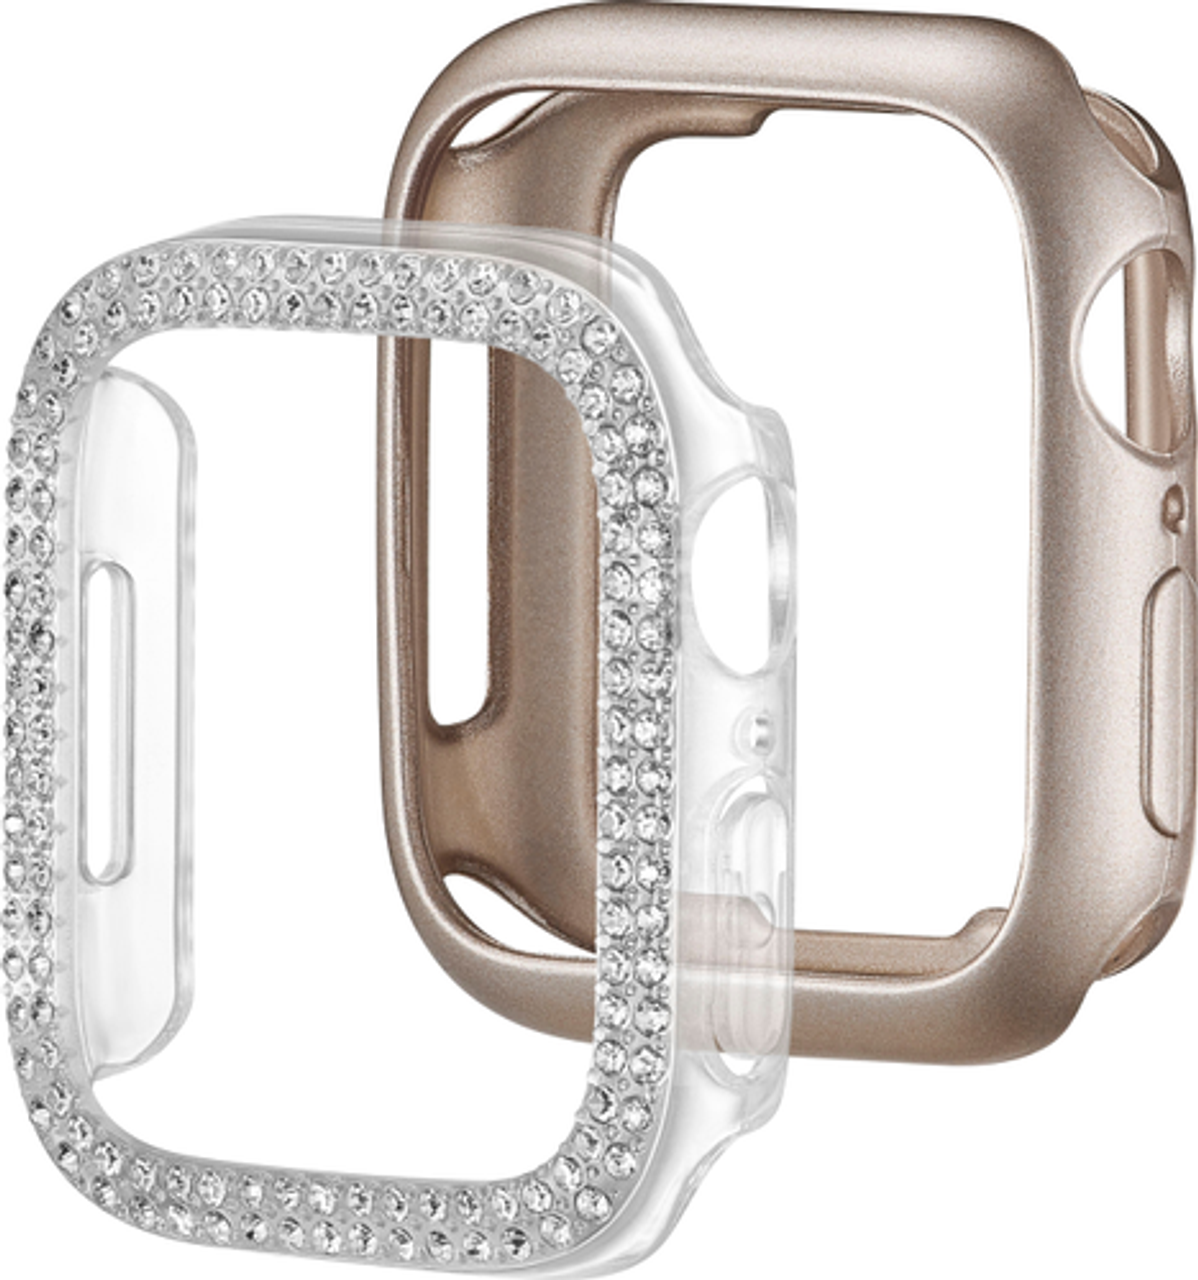 Insignia™ - Bumper Cases for Apple Watch 41mm (2-Pack) - Bling/Champagne